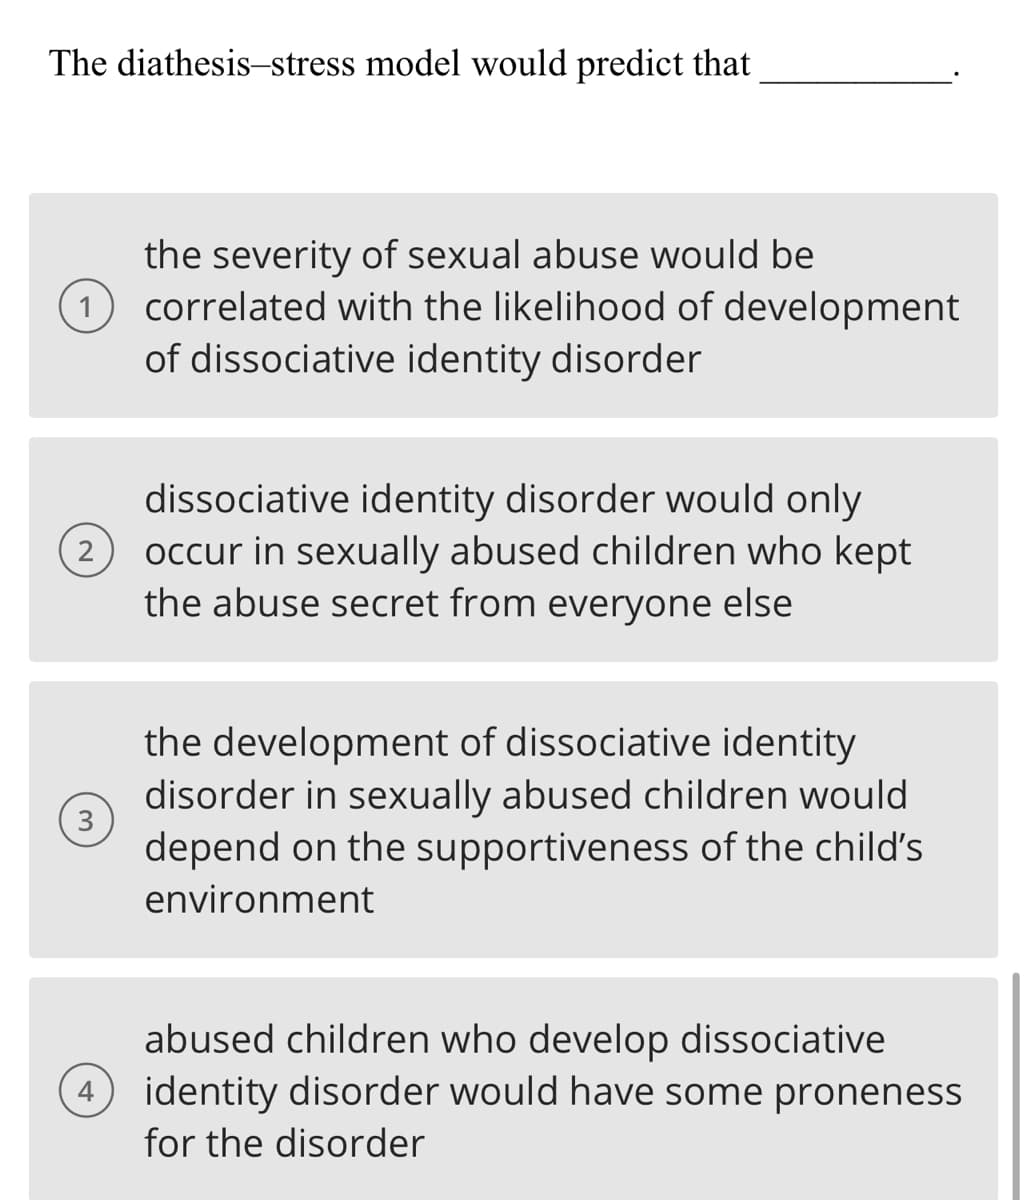 The diathesis-stress model would predict that
the severity of sexual abuse would be
(1) correlated with the likelihood of development
of dissociative identity disorder
2
3
4
dissociative identity disorder would only
occur in sexually abused children who kept
the abuse secret from everyone else
the development of dissociative identity
disorder in sexually abused children would
depend on the supportiveness of the child's
environment
abused children who develop dissociative
identity disorder would have some proneness
for the disorder